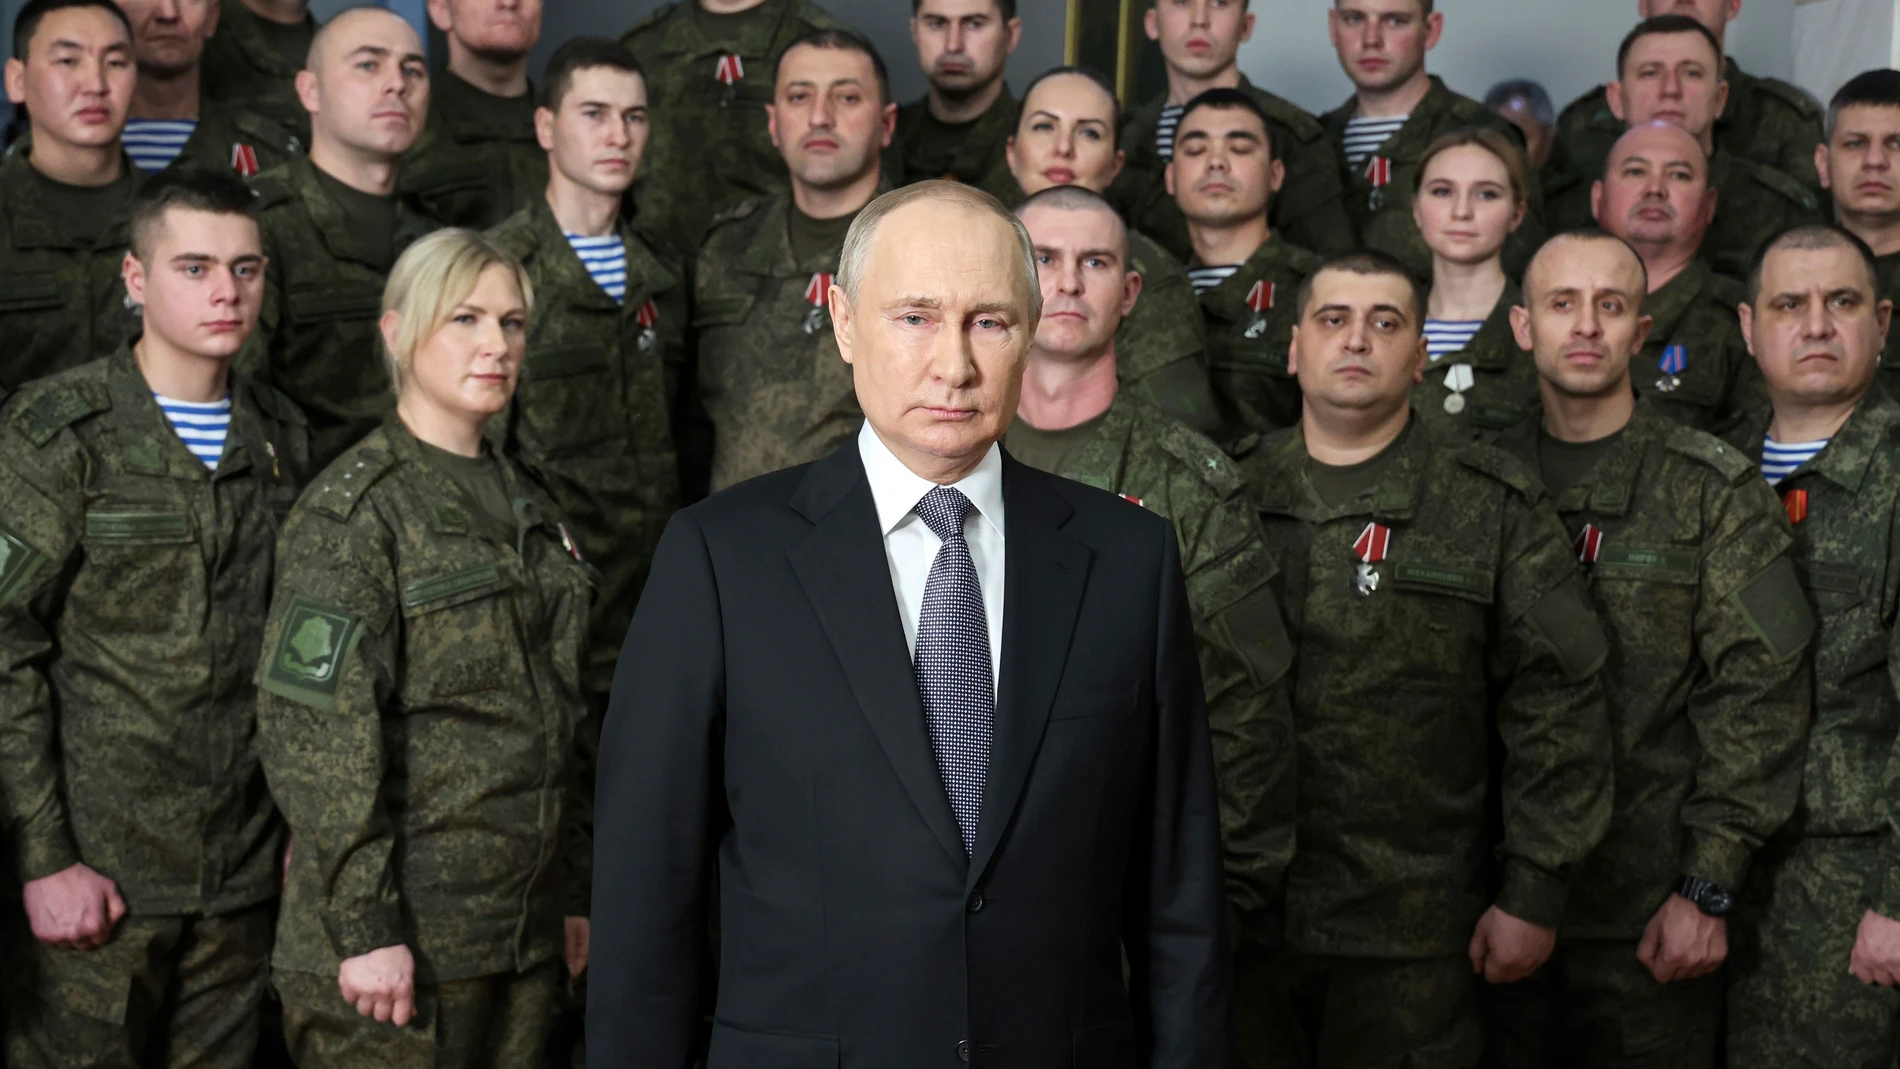 FILE - President Vladimir Putin speaks in his annual New Year's message after a visit to military officials at an unknown location in Russia, on Dec. 31, 2022. With the fighting in Ukraine entering its third year, Putin hopes to achieve his goals by biding his time and waiting for Western support for Ukraine to wither while Moscow maintains its steady military pressure along the front line. (Mikhail Klimentyev, Sputnik, Kremlin Pool Photo via AP, File)